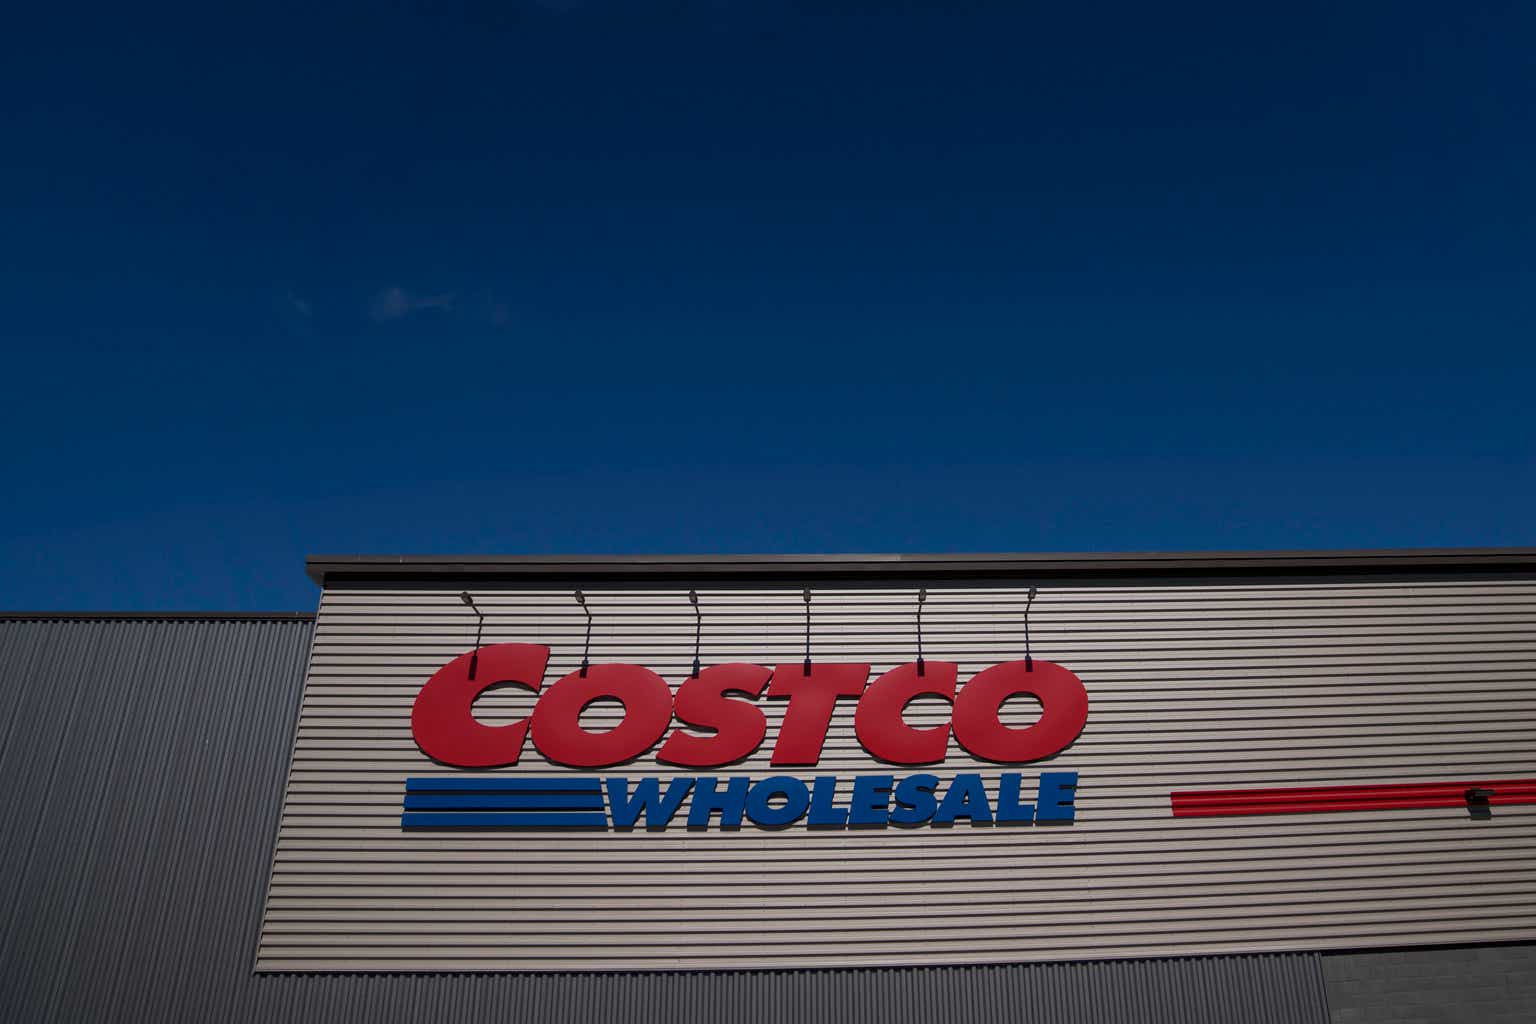 Costco: Fourth-Quarter Results Show Resilience, But Valuation Remains High (Rating Upgrade)